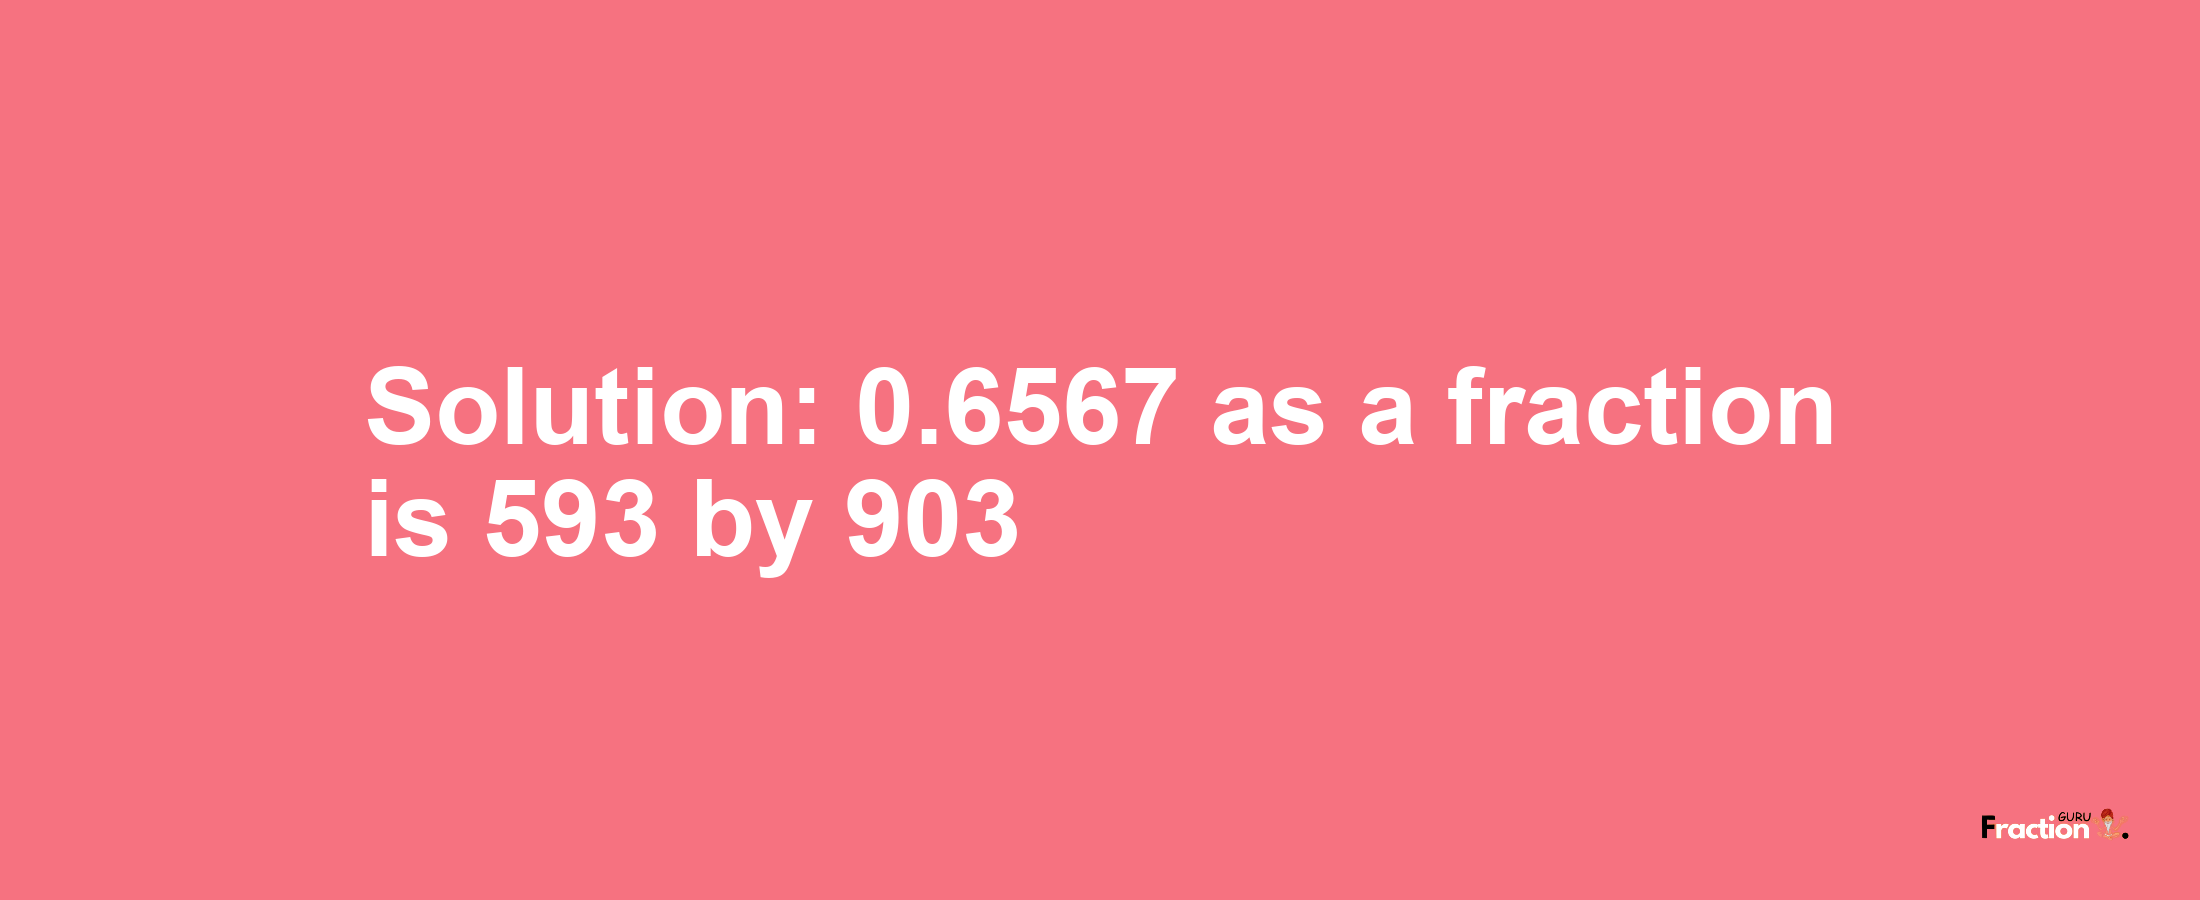 Solution:0.6567 as a fraction is 593/903